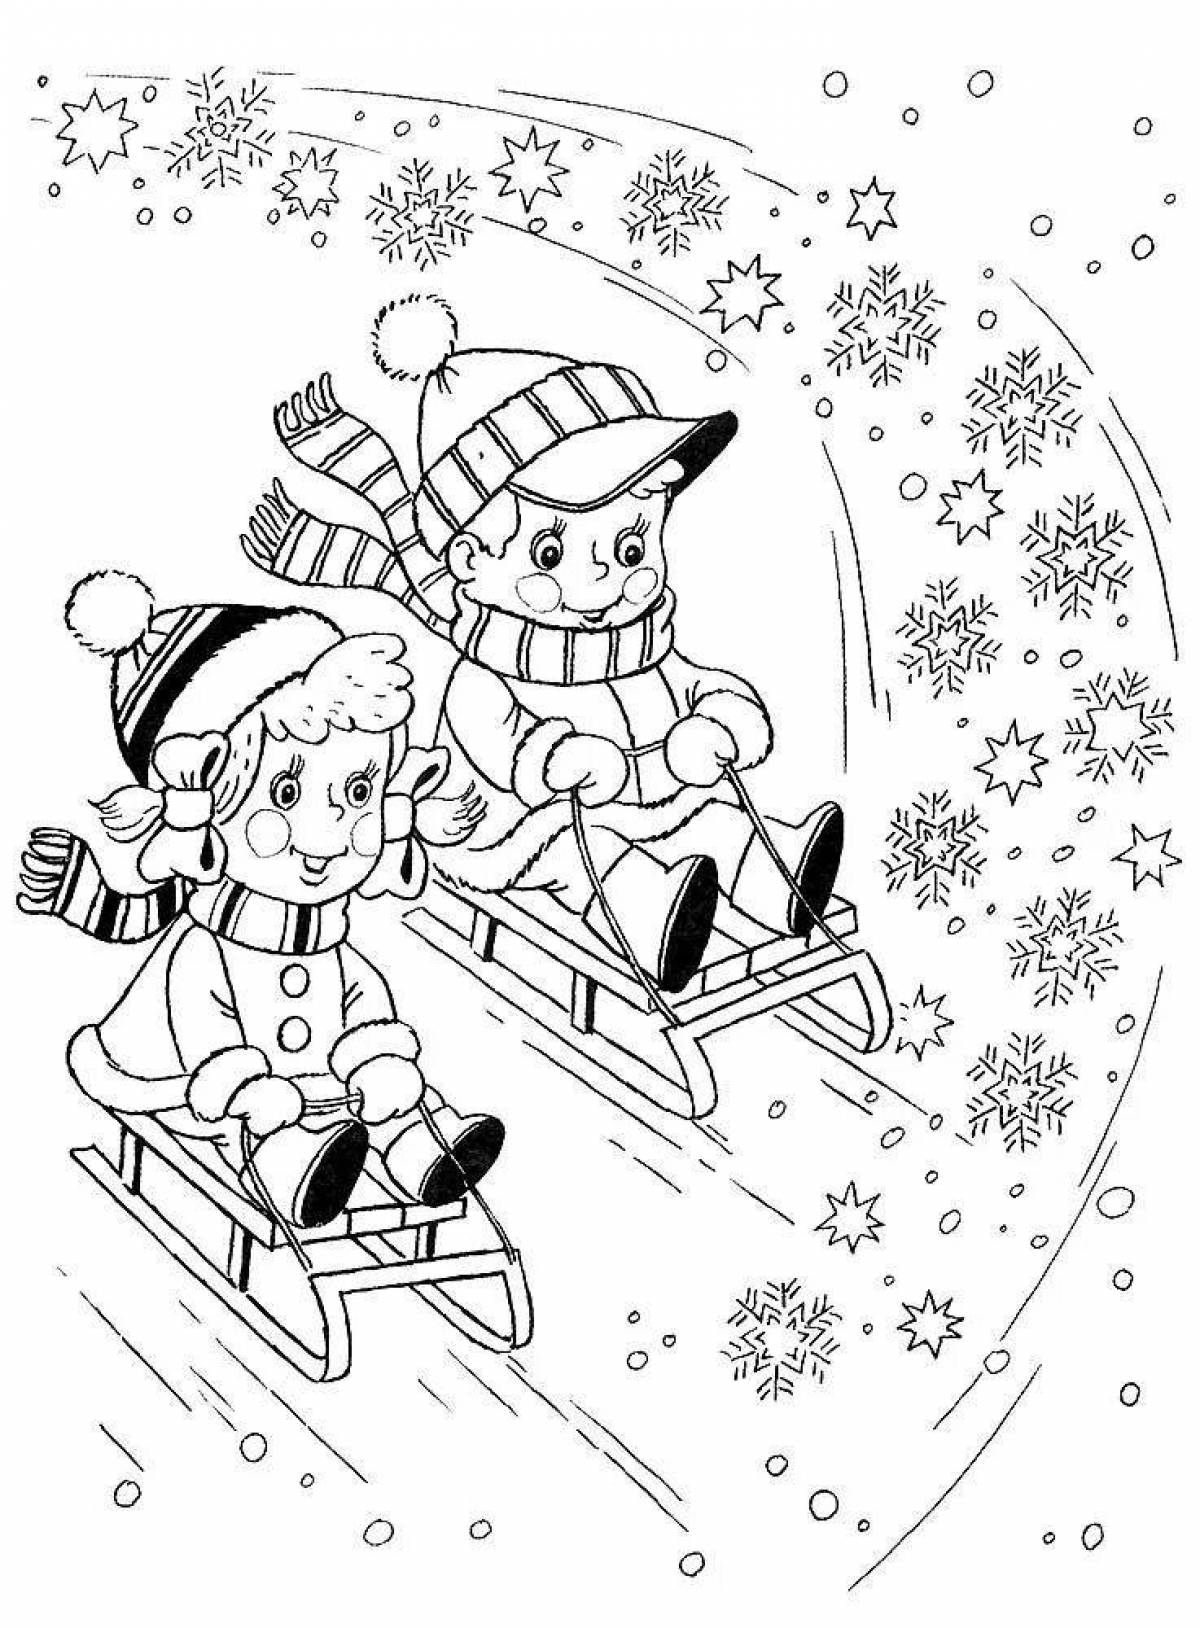 Colourful children's coloring book on a sled